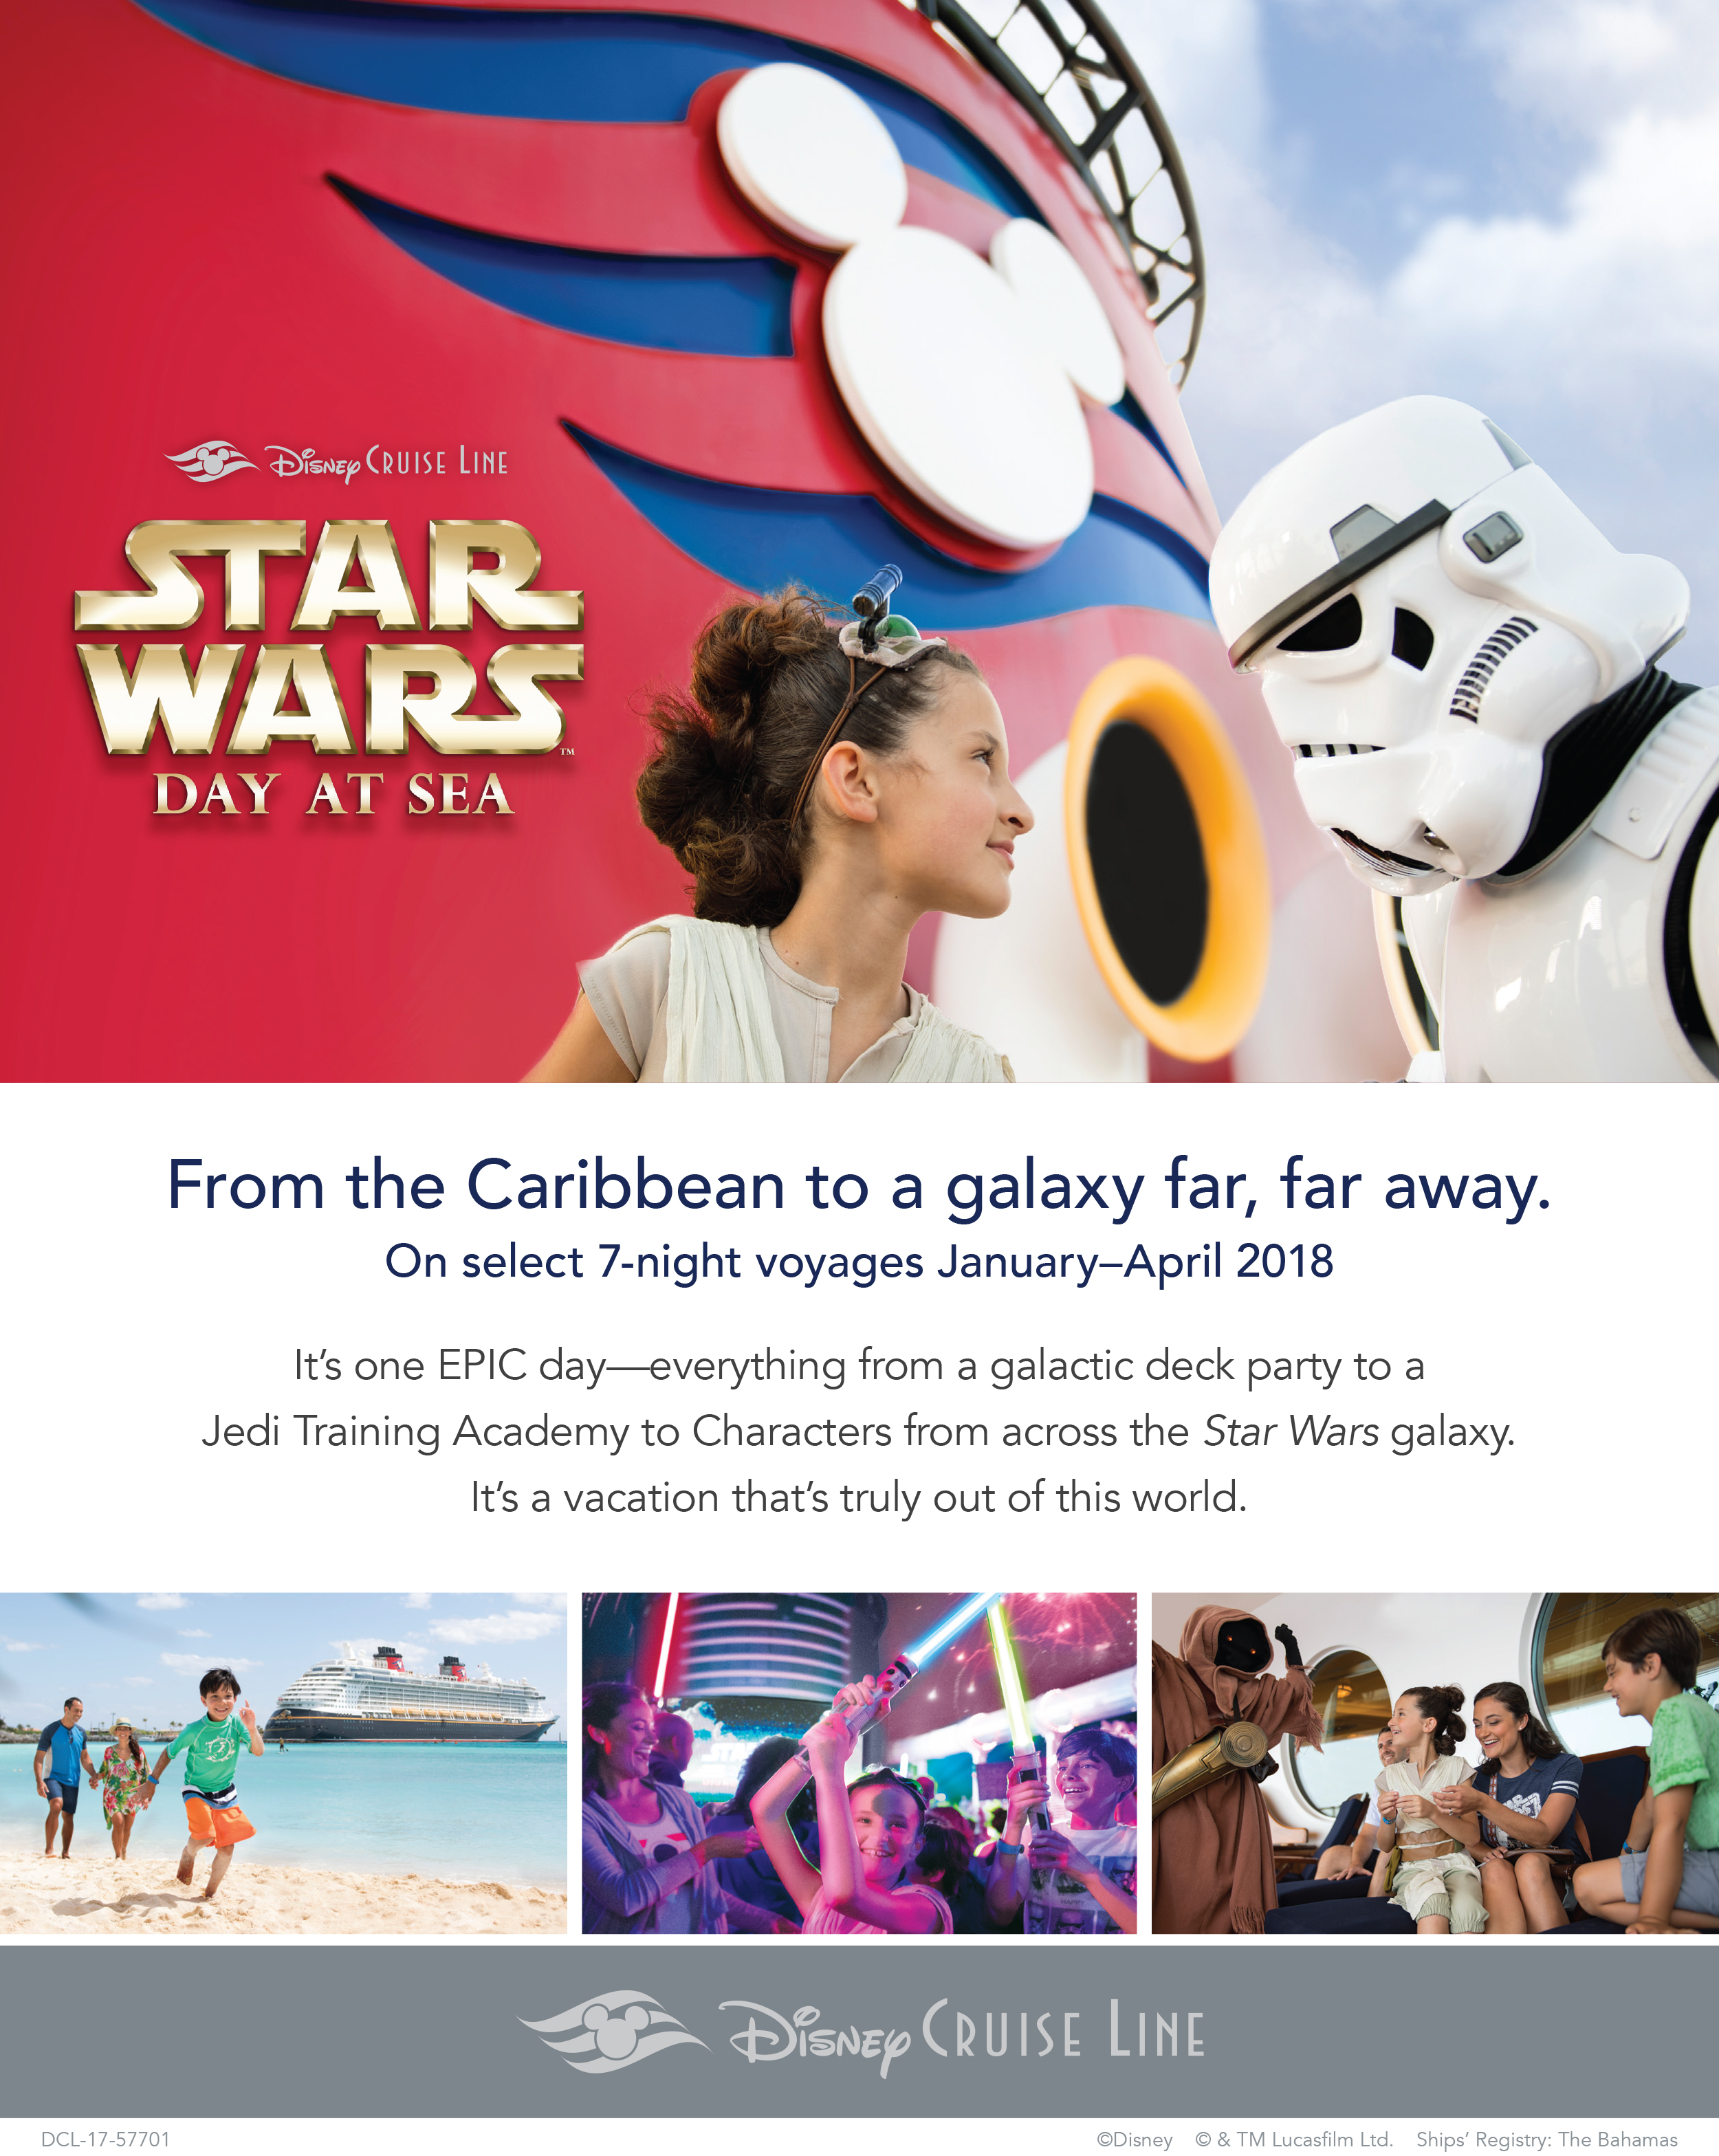 Disney Cruise Line, Star Wars Day at Sea. Explore, You Will.